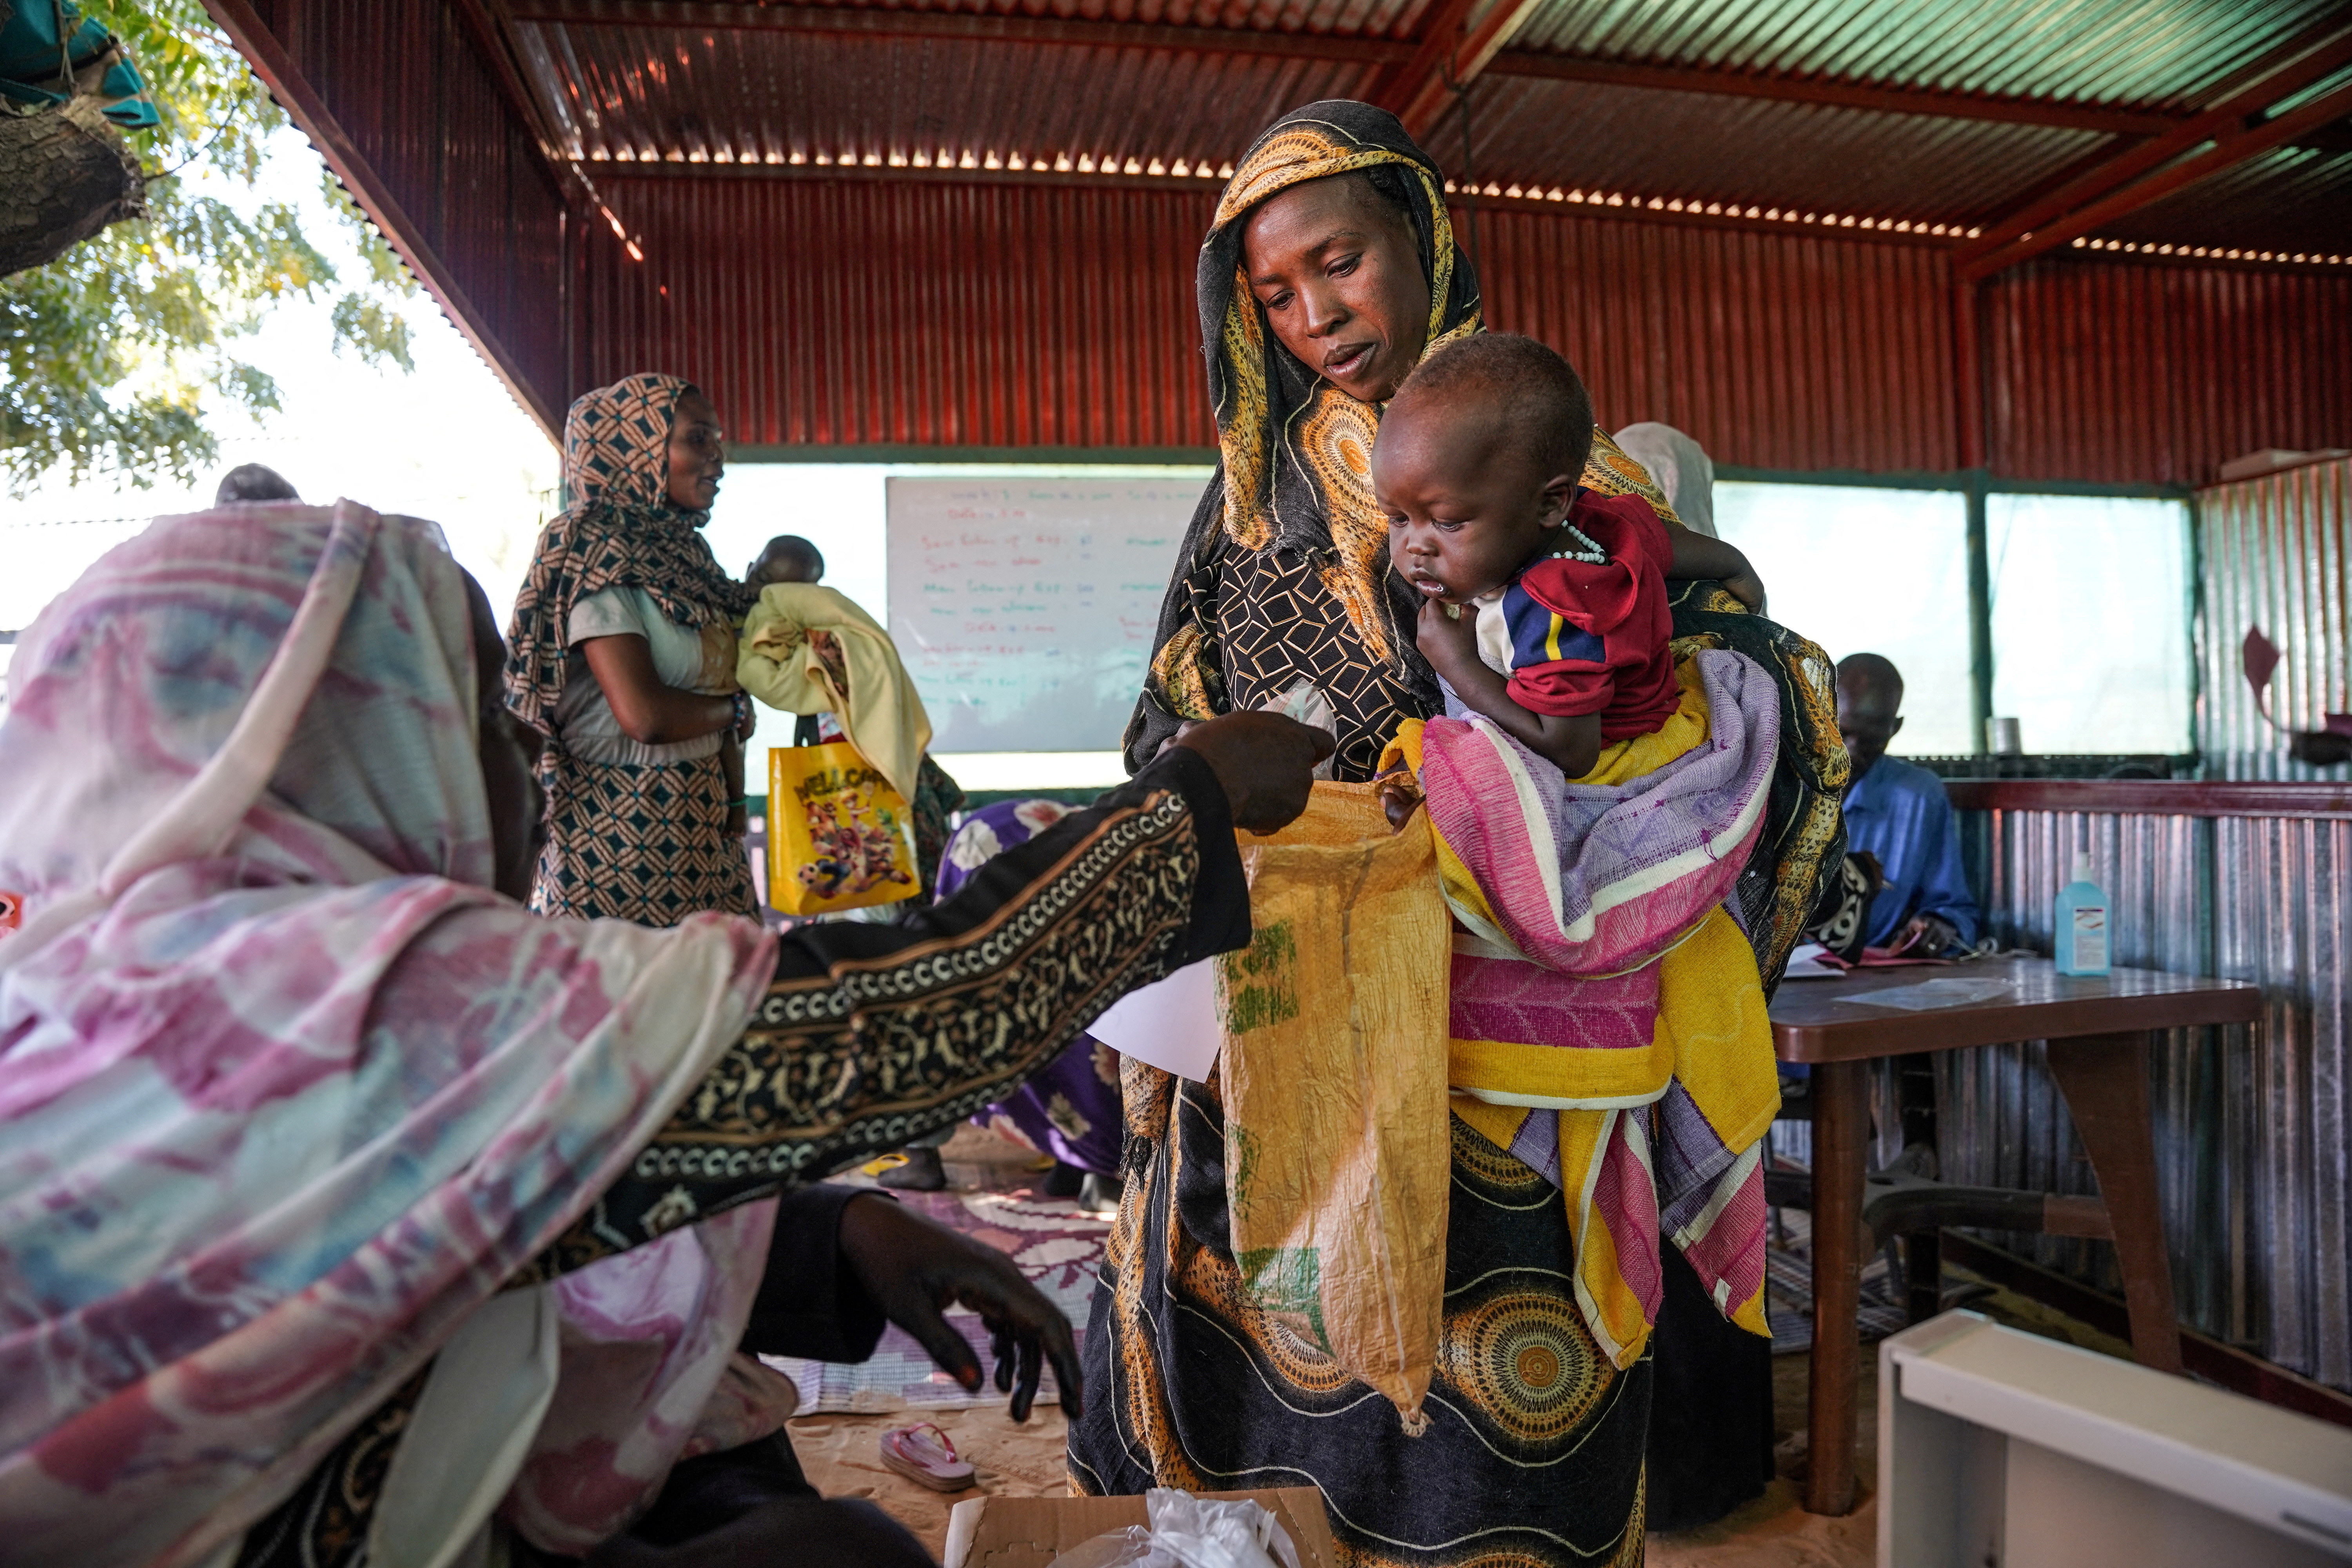 Handout photograph of a woman and baby at the Zamzam displacement camp in North Darfur